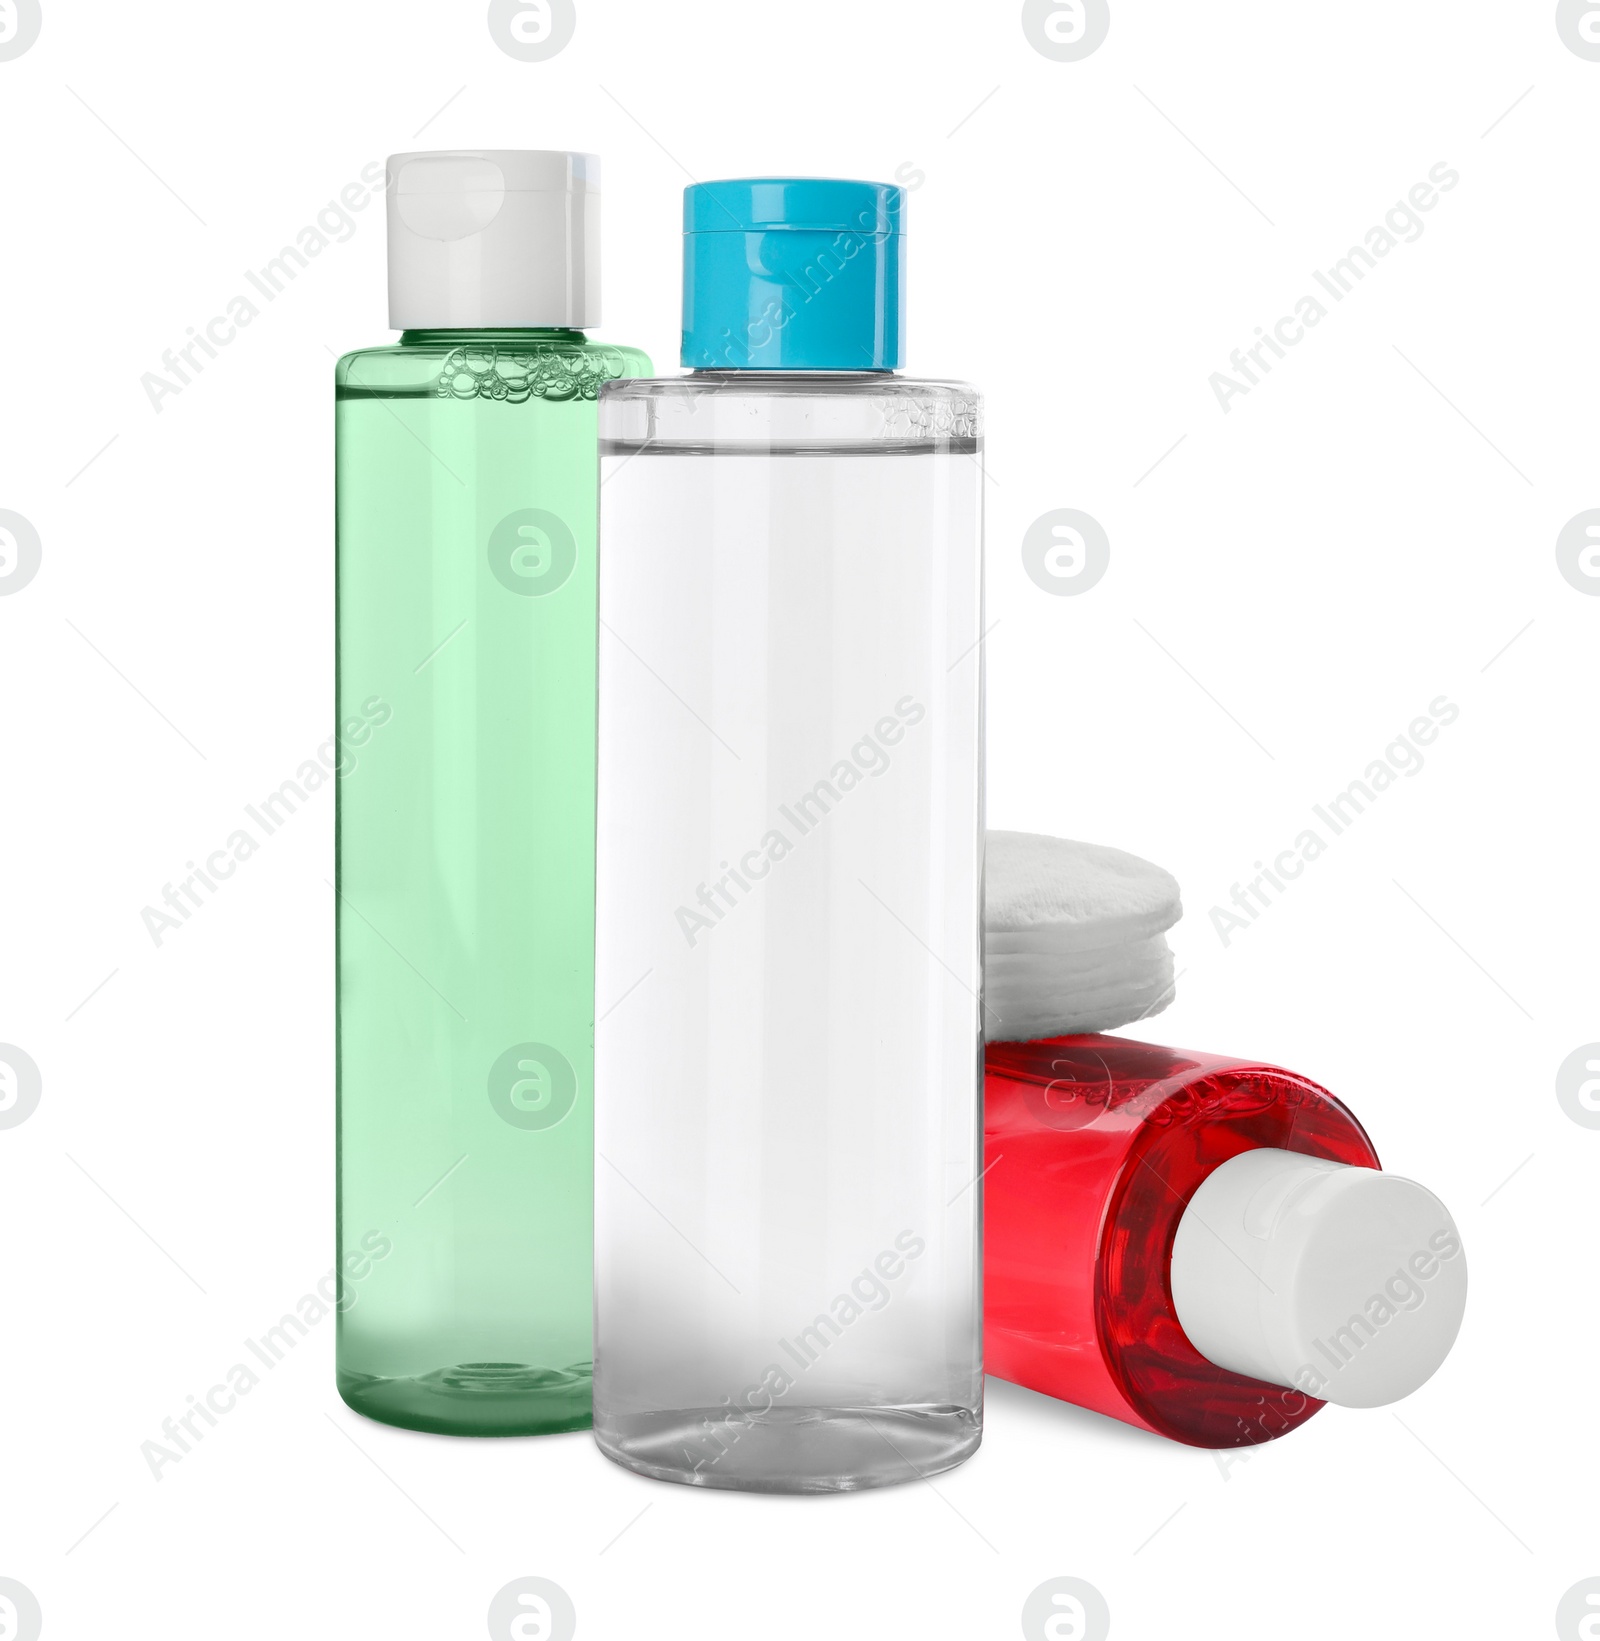 Photo of Bottles of micellar cleansing water and cotton pads on white background